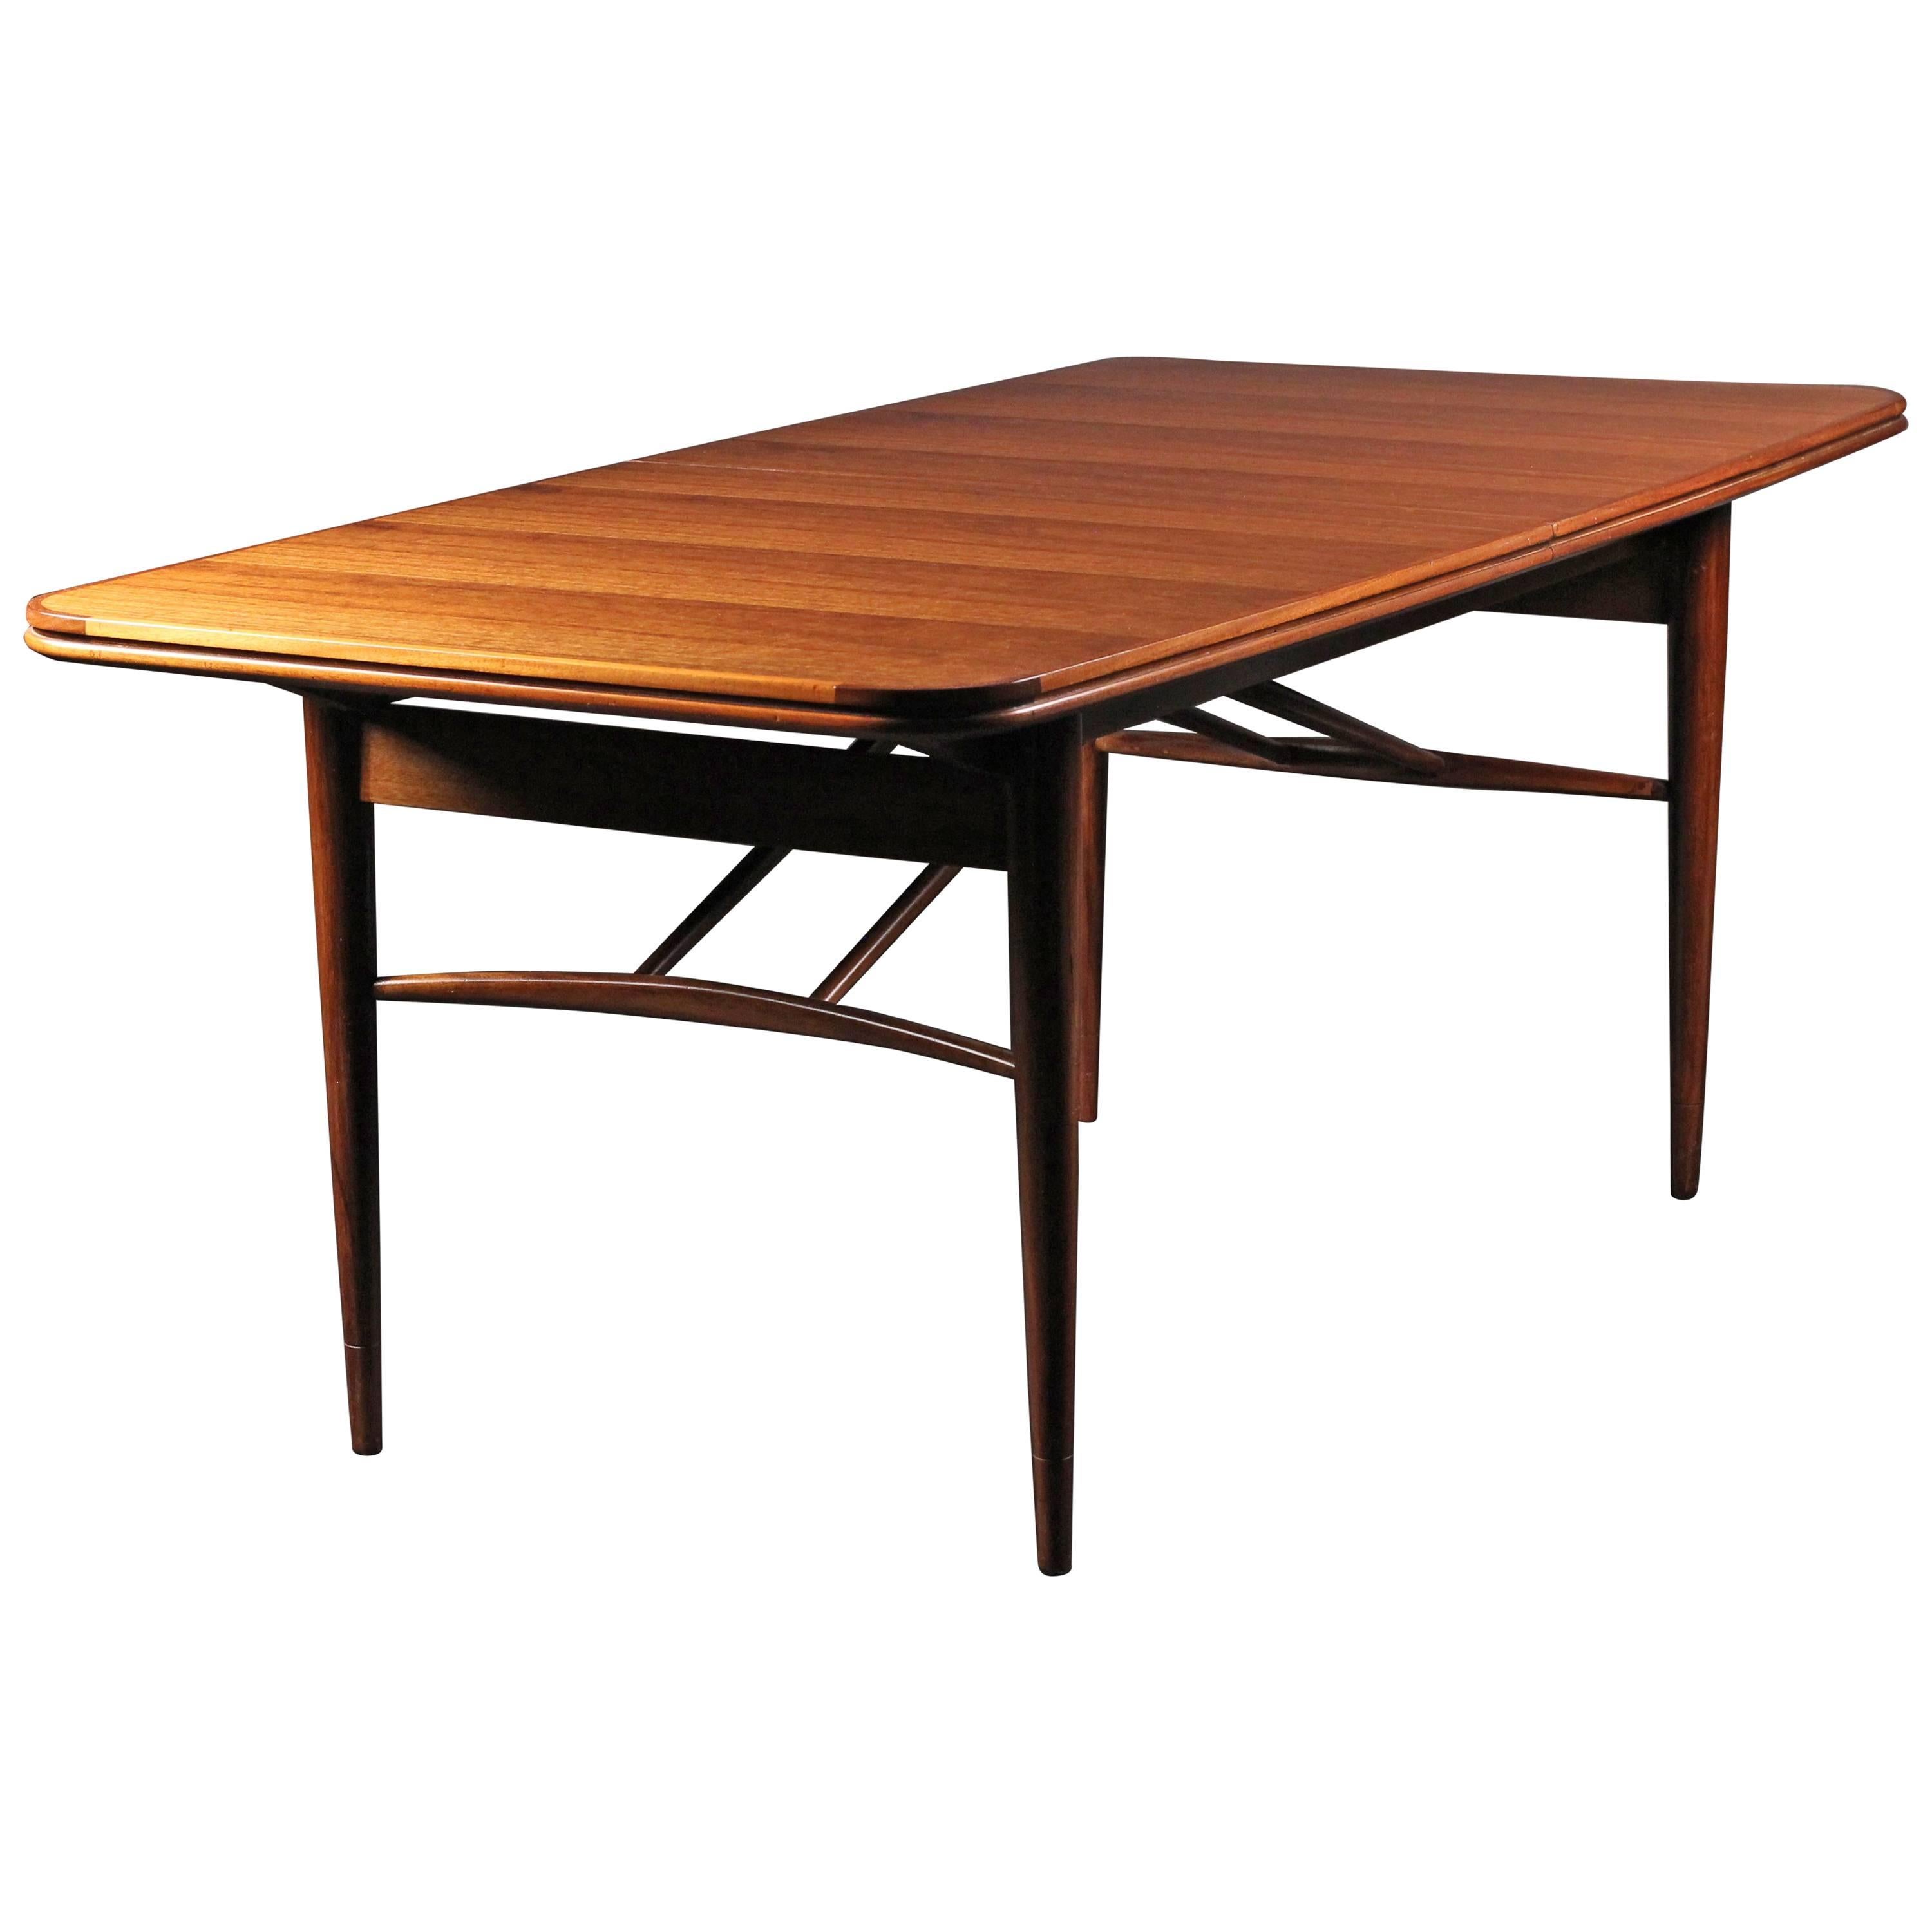 Mid-Century Modern Dining Table by Robert Heritage for Archie Shine